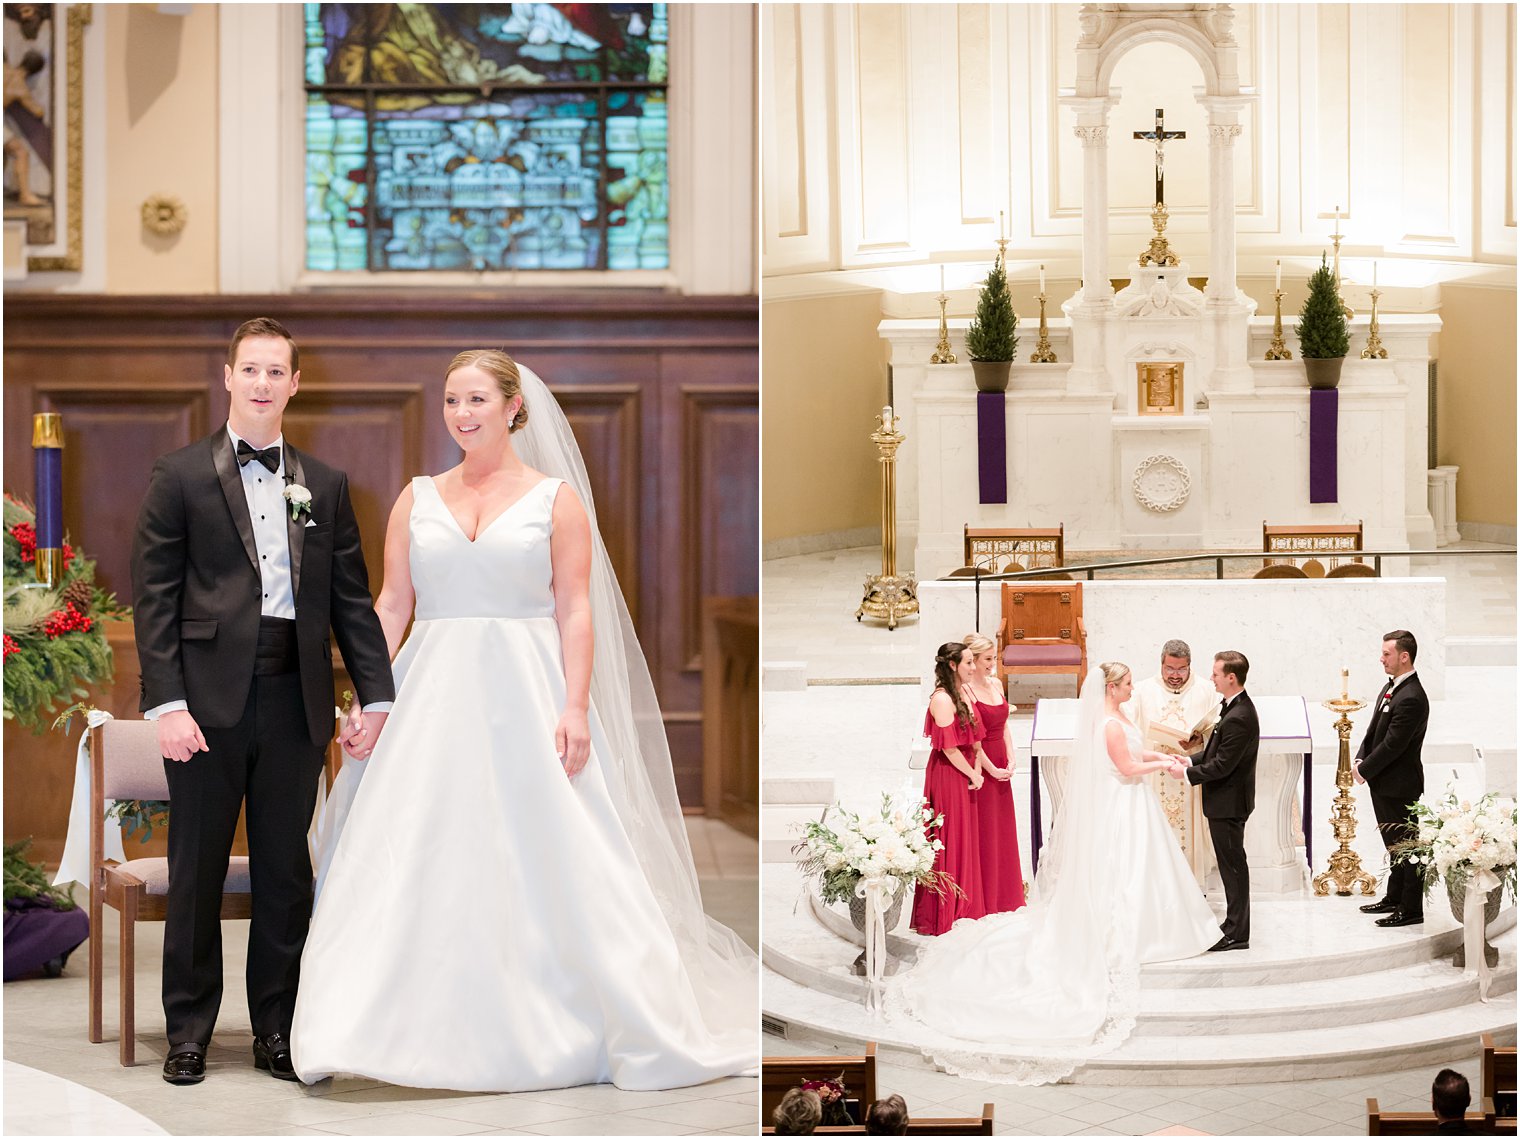 wedding ceremony at Church of the Immaculate Conception in Montclair, NJ